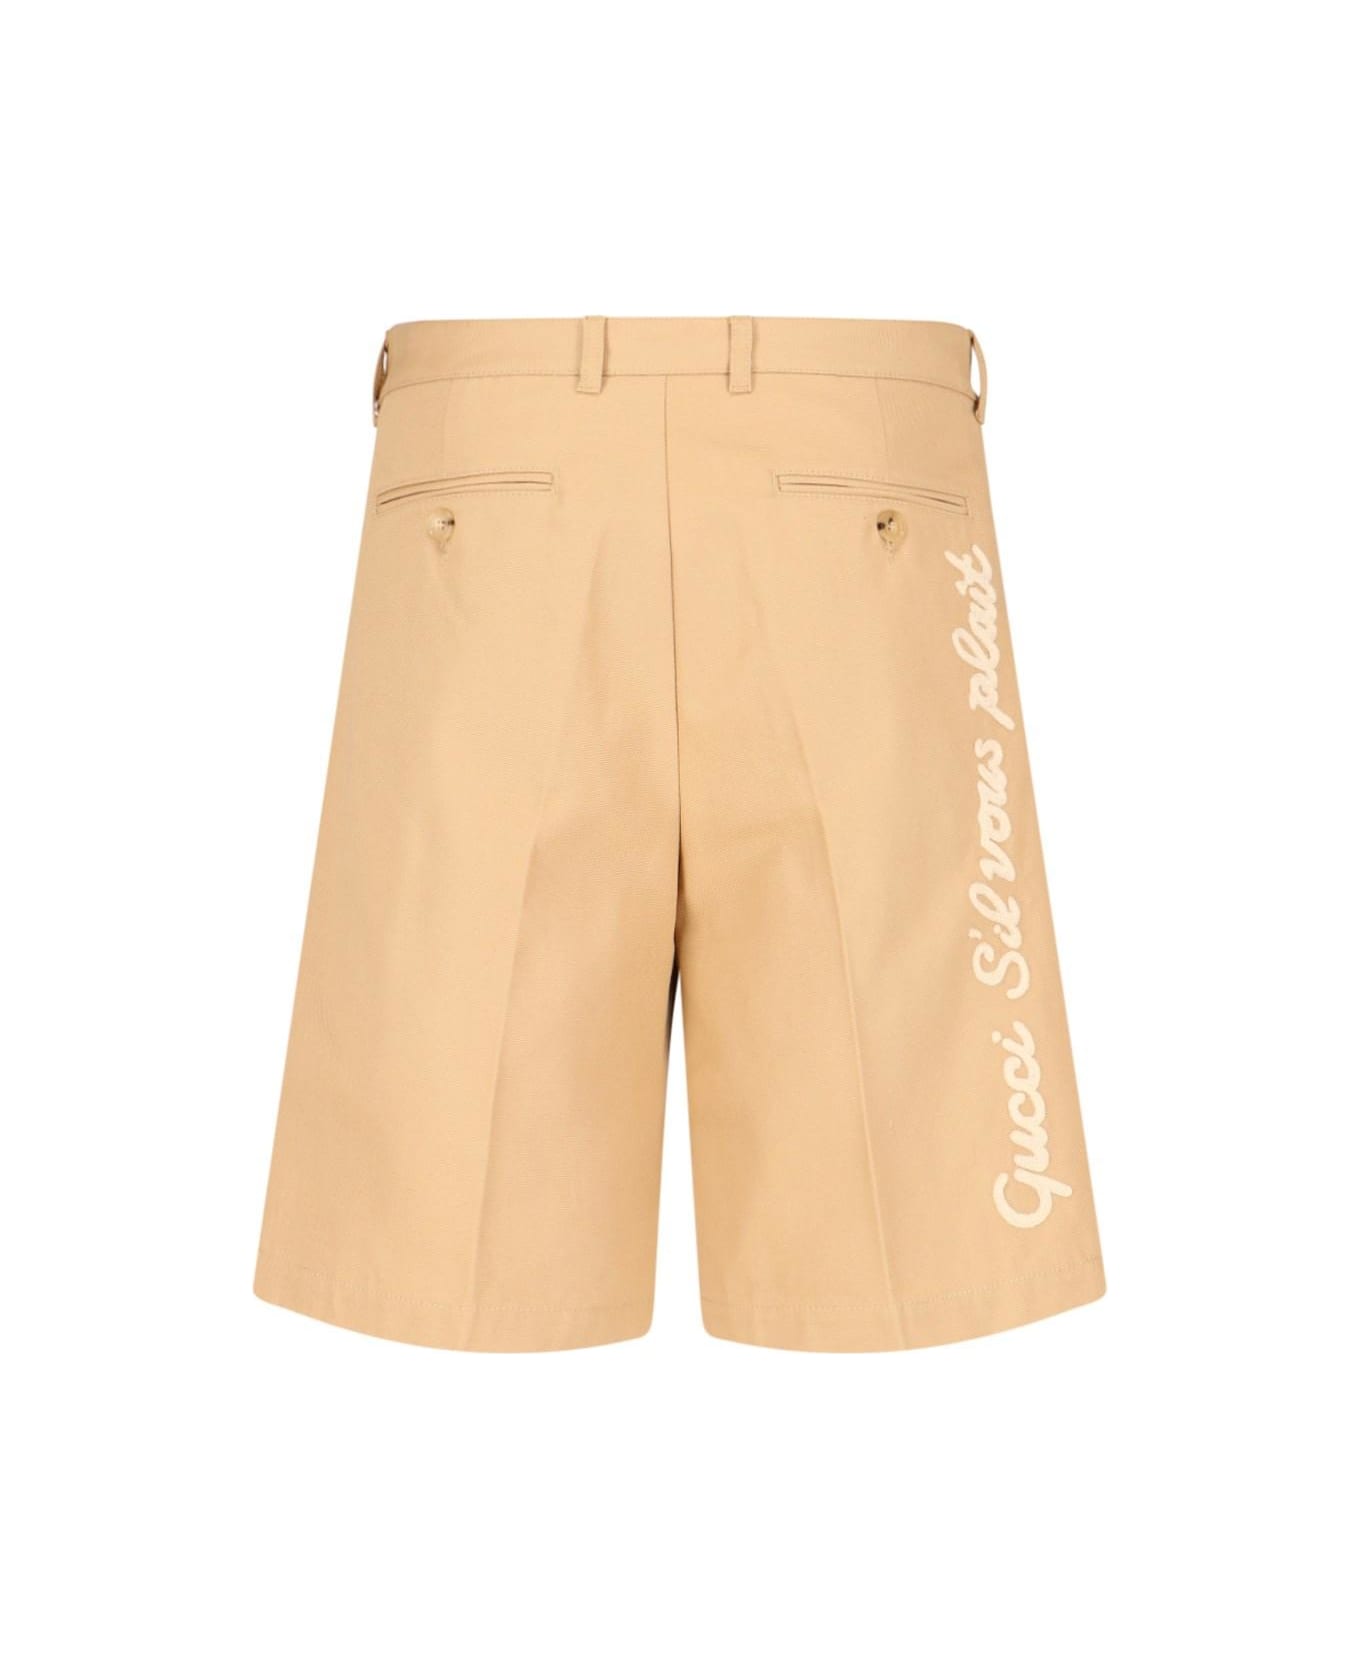 Gucci Back Embroidered Shorts - Beige